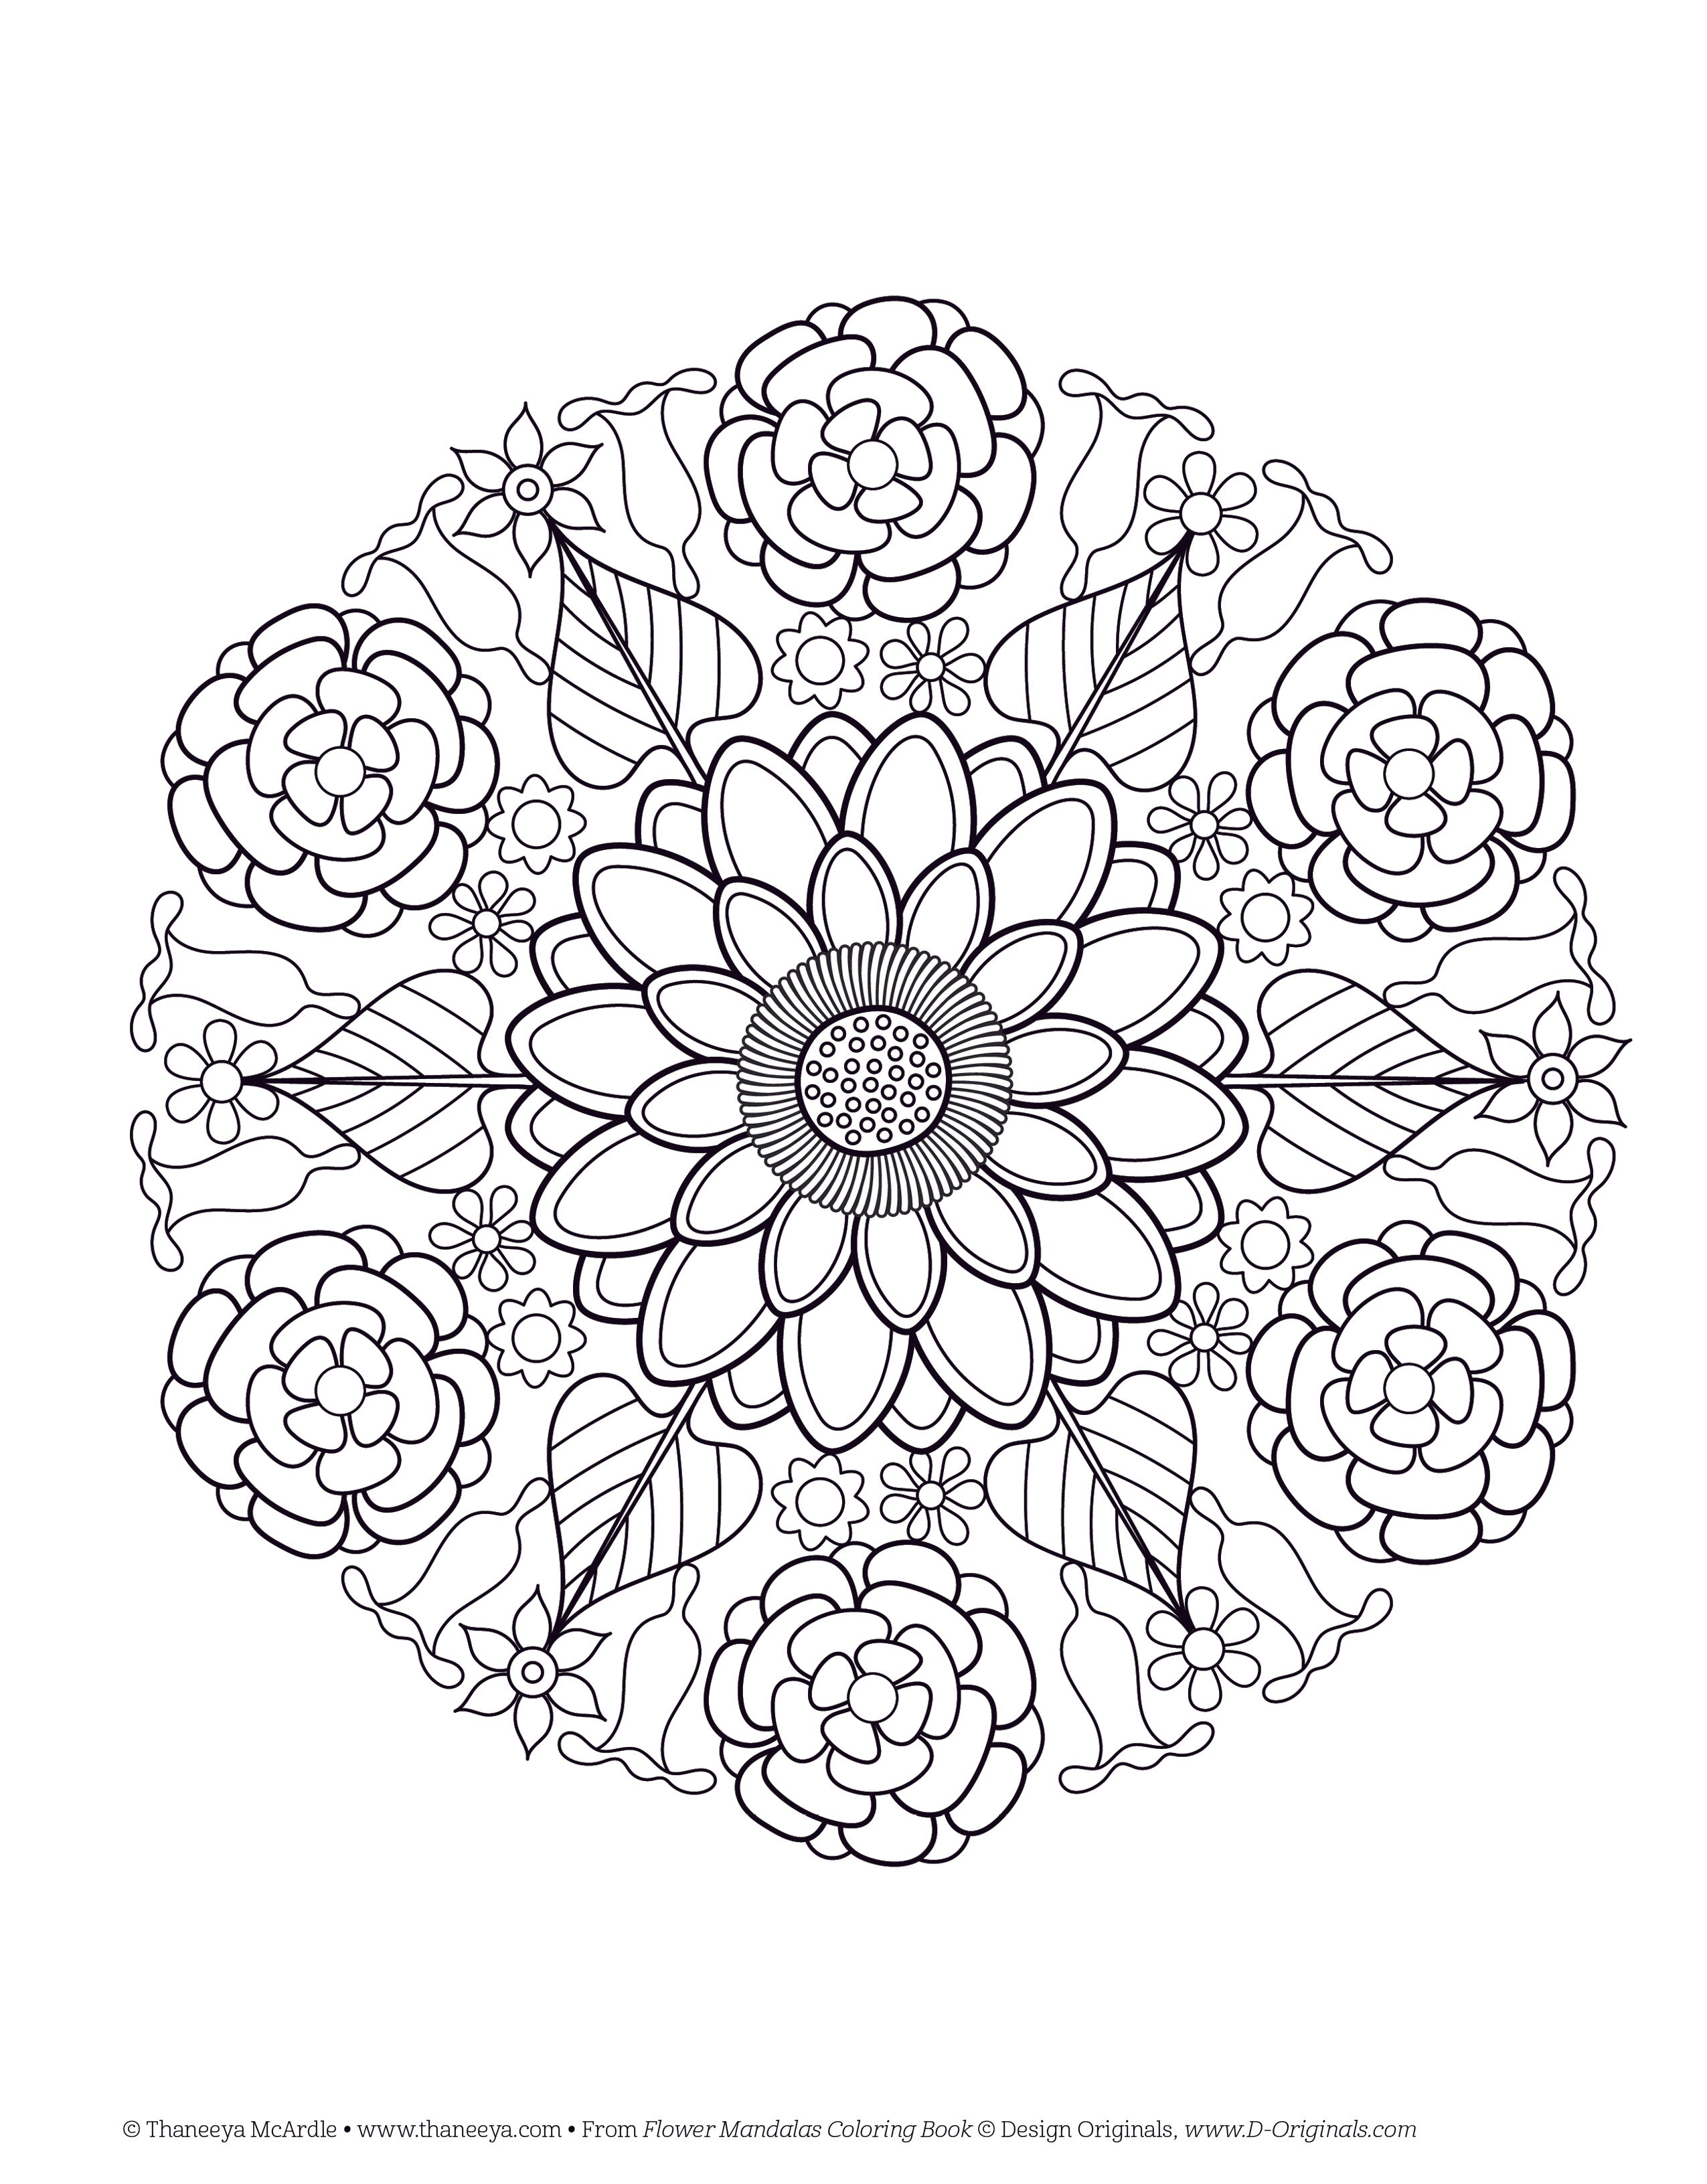 create 3d butterfly mandala coloring book cover